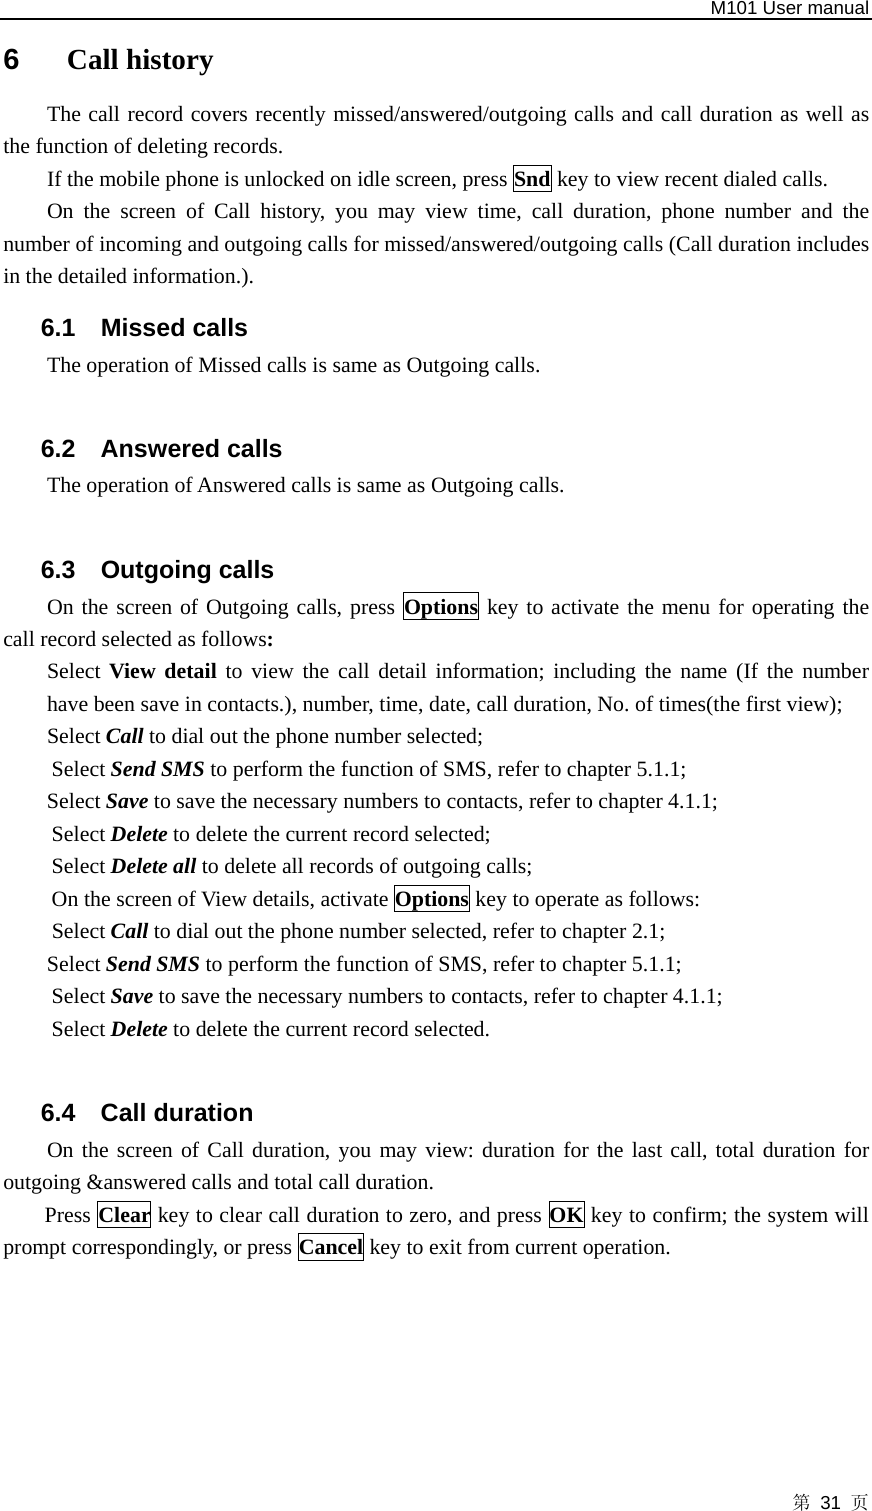   M101 User manual 第 31 页 6  Call history The call record covers recently missed/answered/outgoing calls and call duration as well as the function of deleting records.   If the mobile phone is unlocked on idle screen, press Snd key to view recent dialed calls. On the screen of Call history, you may view time, call duration, phone number and the number of incoming and outgoing calls for missed/answered/outgoing calls (Call duration includes in the detailed information.). 6.1 Missed calls The operation of Missed calls is same as Outgoing calls.  6.2 Answered calls The operation of Answered calls is same as Outgoing calls.  6.3 Outgoing calls On the screen of Outgoing calls, press Options key to activate the menu for operating the call record selected as follows: Select View detail to view the call detail information; including the name (If the number have been save in contacts.), number, time, date, call duration, No. of times(the first view); Select Call to dial out the phone number selected;   Select Send SMS to perform the function of SMS, refer to chapter 5.1.1;   Select Save to save the necessary numbers to contacts, refer to chapter 4.1.1;   Select Delete to delete the current record selected;   Select Delete all to delete all records of outgoing calls;   On the screen of View details, activate Options key to operate as follows:   Select Call to dial out the phone number selected, refer to chapter 2.1;   Select Send SMS to perform the function of SMS, refer to chapter 5.1.1;   Select Save to save the necessary numbers to contacts, refer to chapter 4.1.1;   Select Delete to delete the current record selected.  6.4 Call duration On the screen of Call duration, you may view: duration for the last call, total duration for outgoing &amp;answered calls and total call duration.   Press Clear key to clear call duration to zero, and press OK key to confirm; the system will prompt correspondingly, or press Cancel key to exit from current operation.  